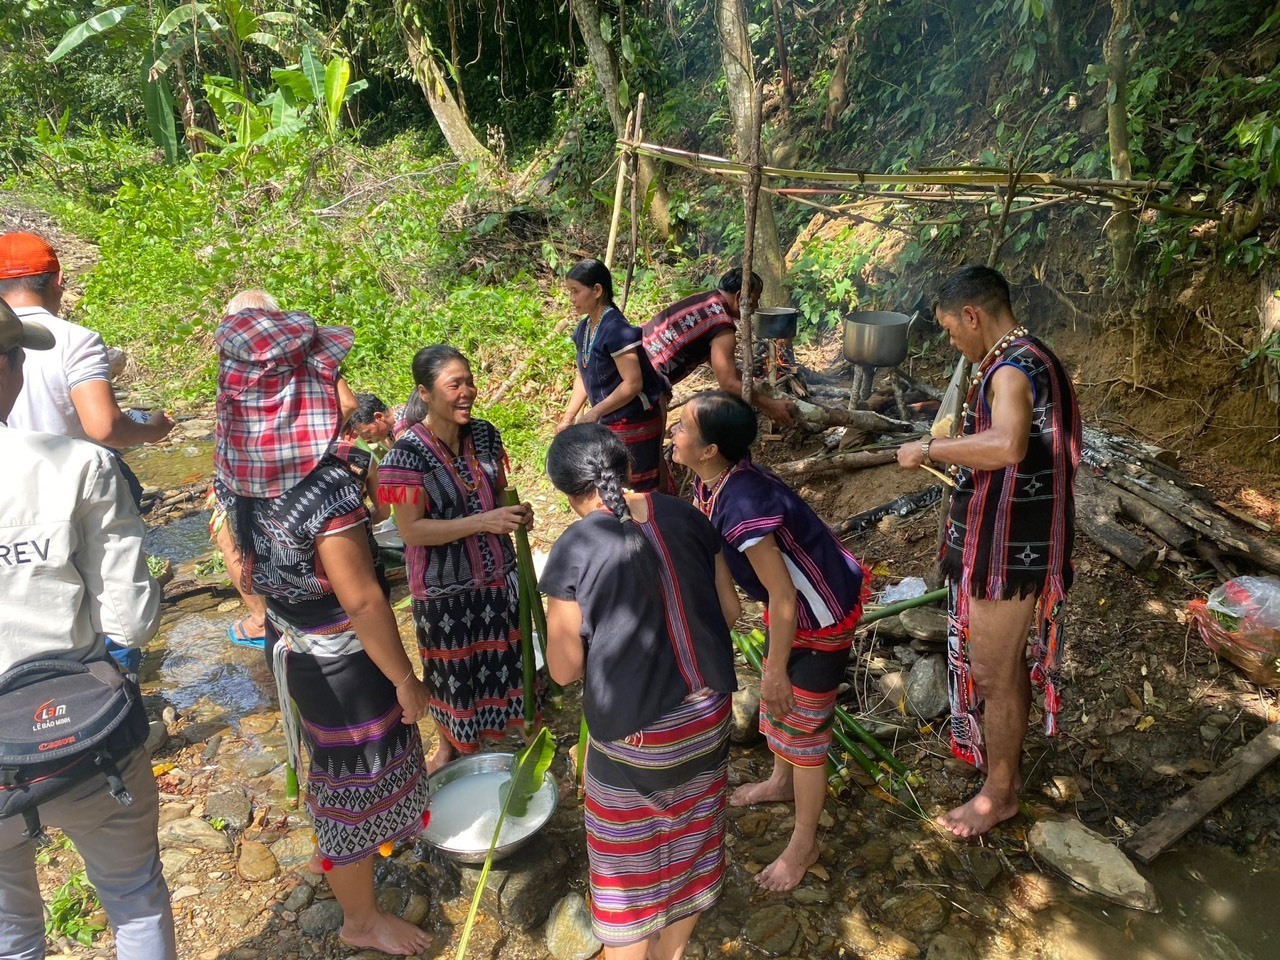 Local people making their traditional food